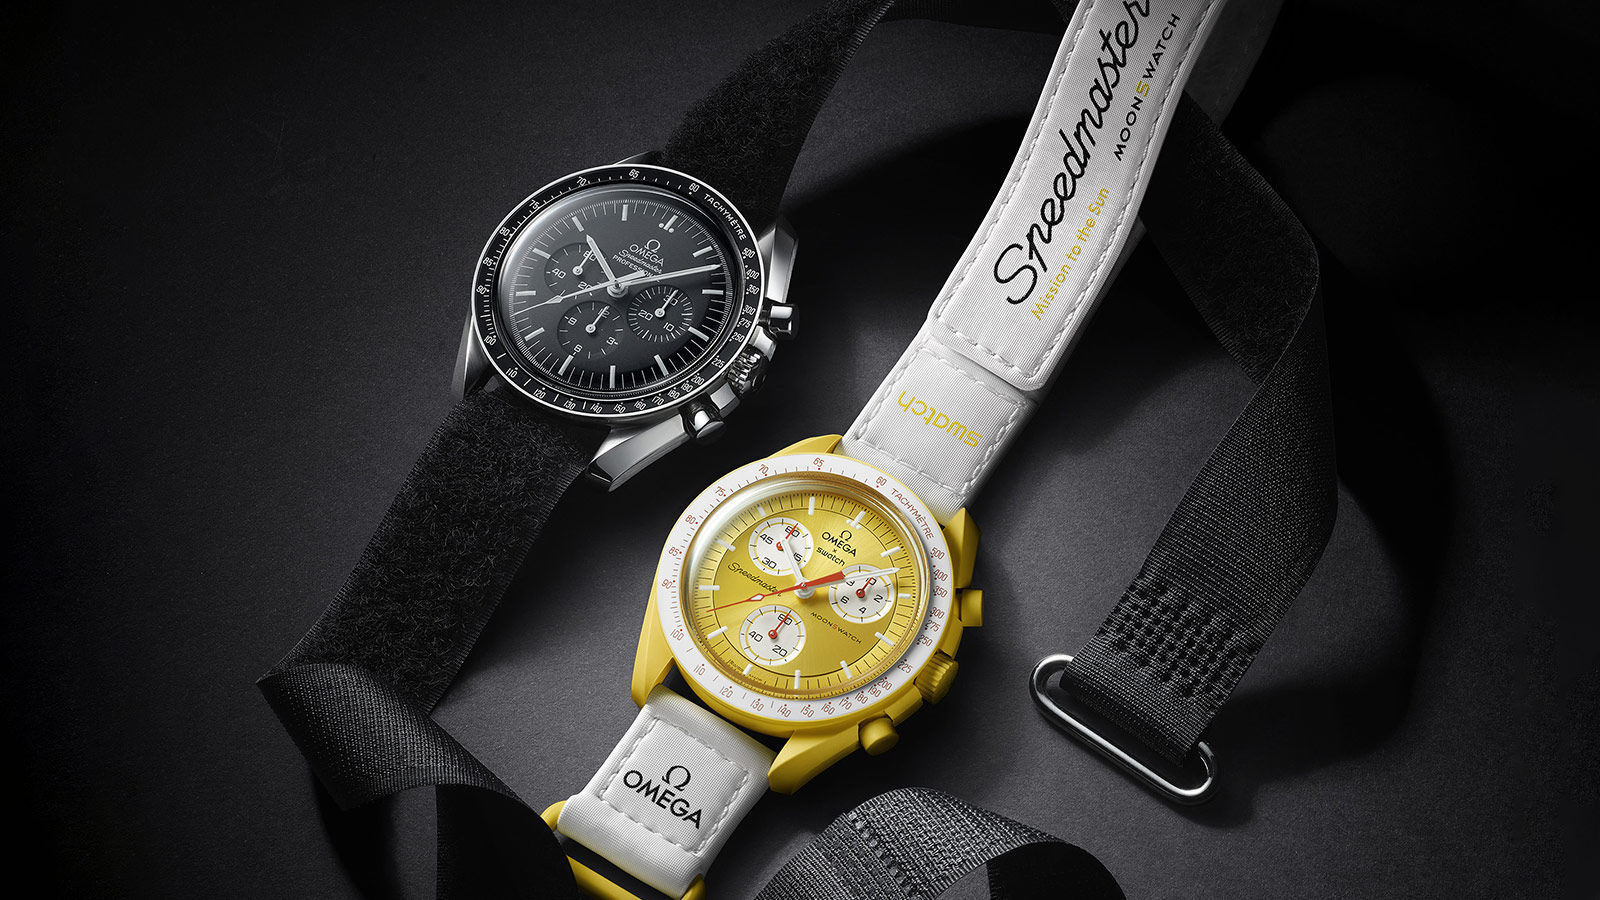 The Omega x Swatch MoonSwatch: Your biggest questions answered